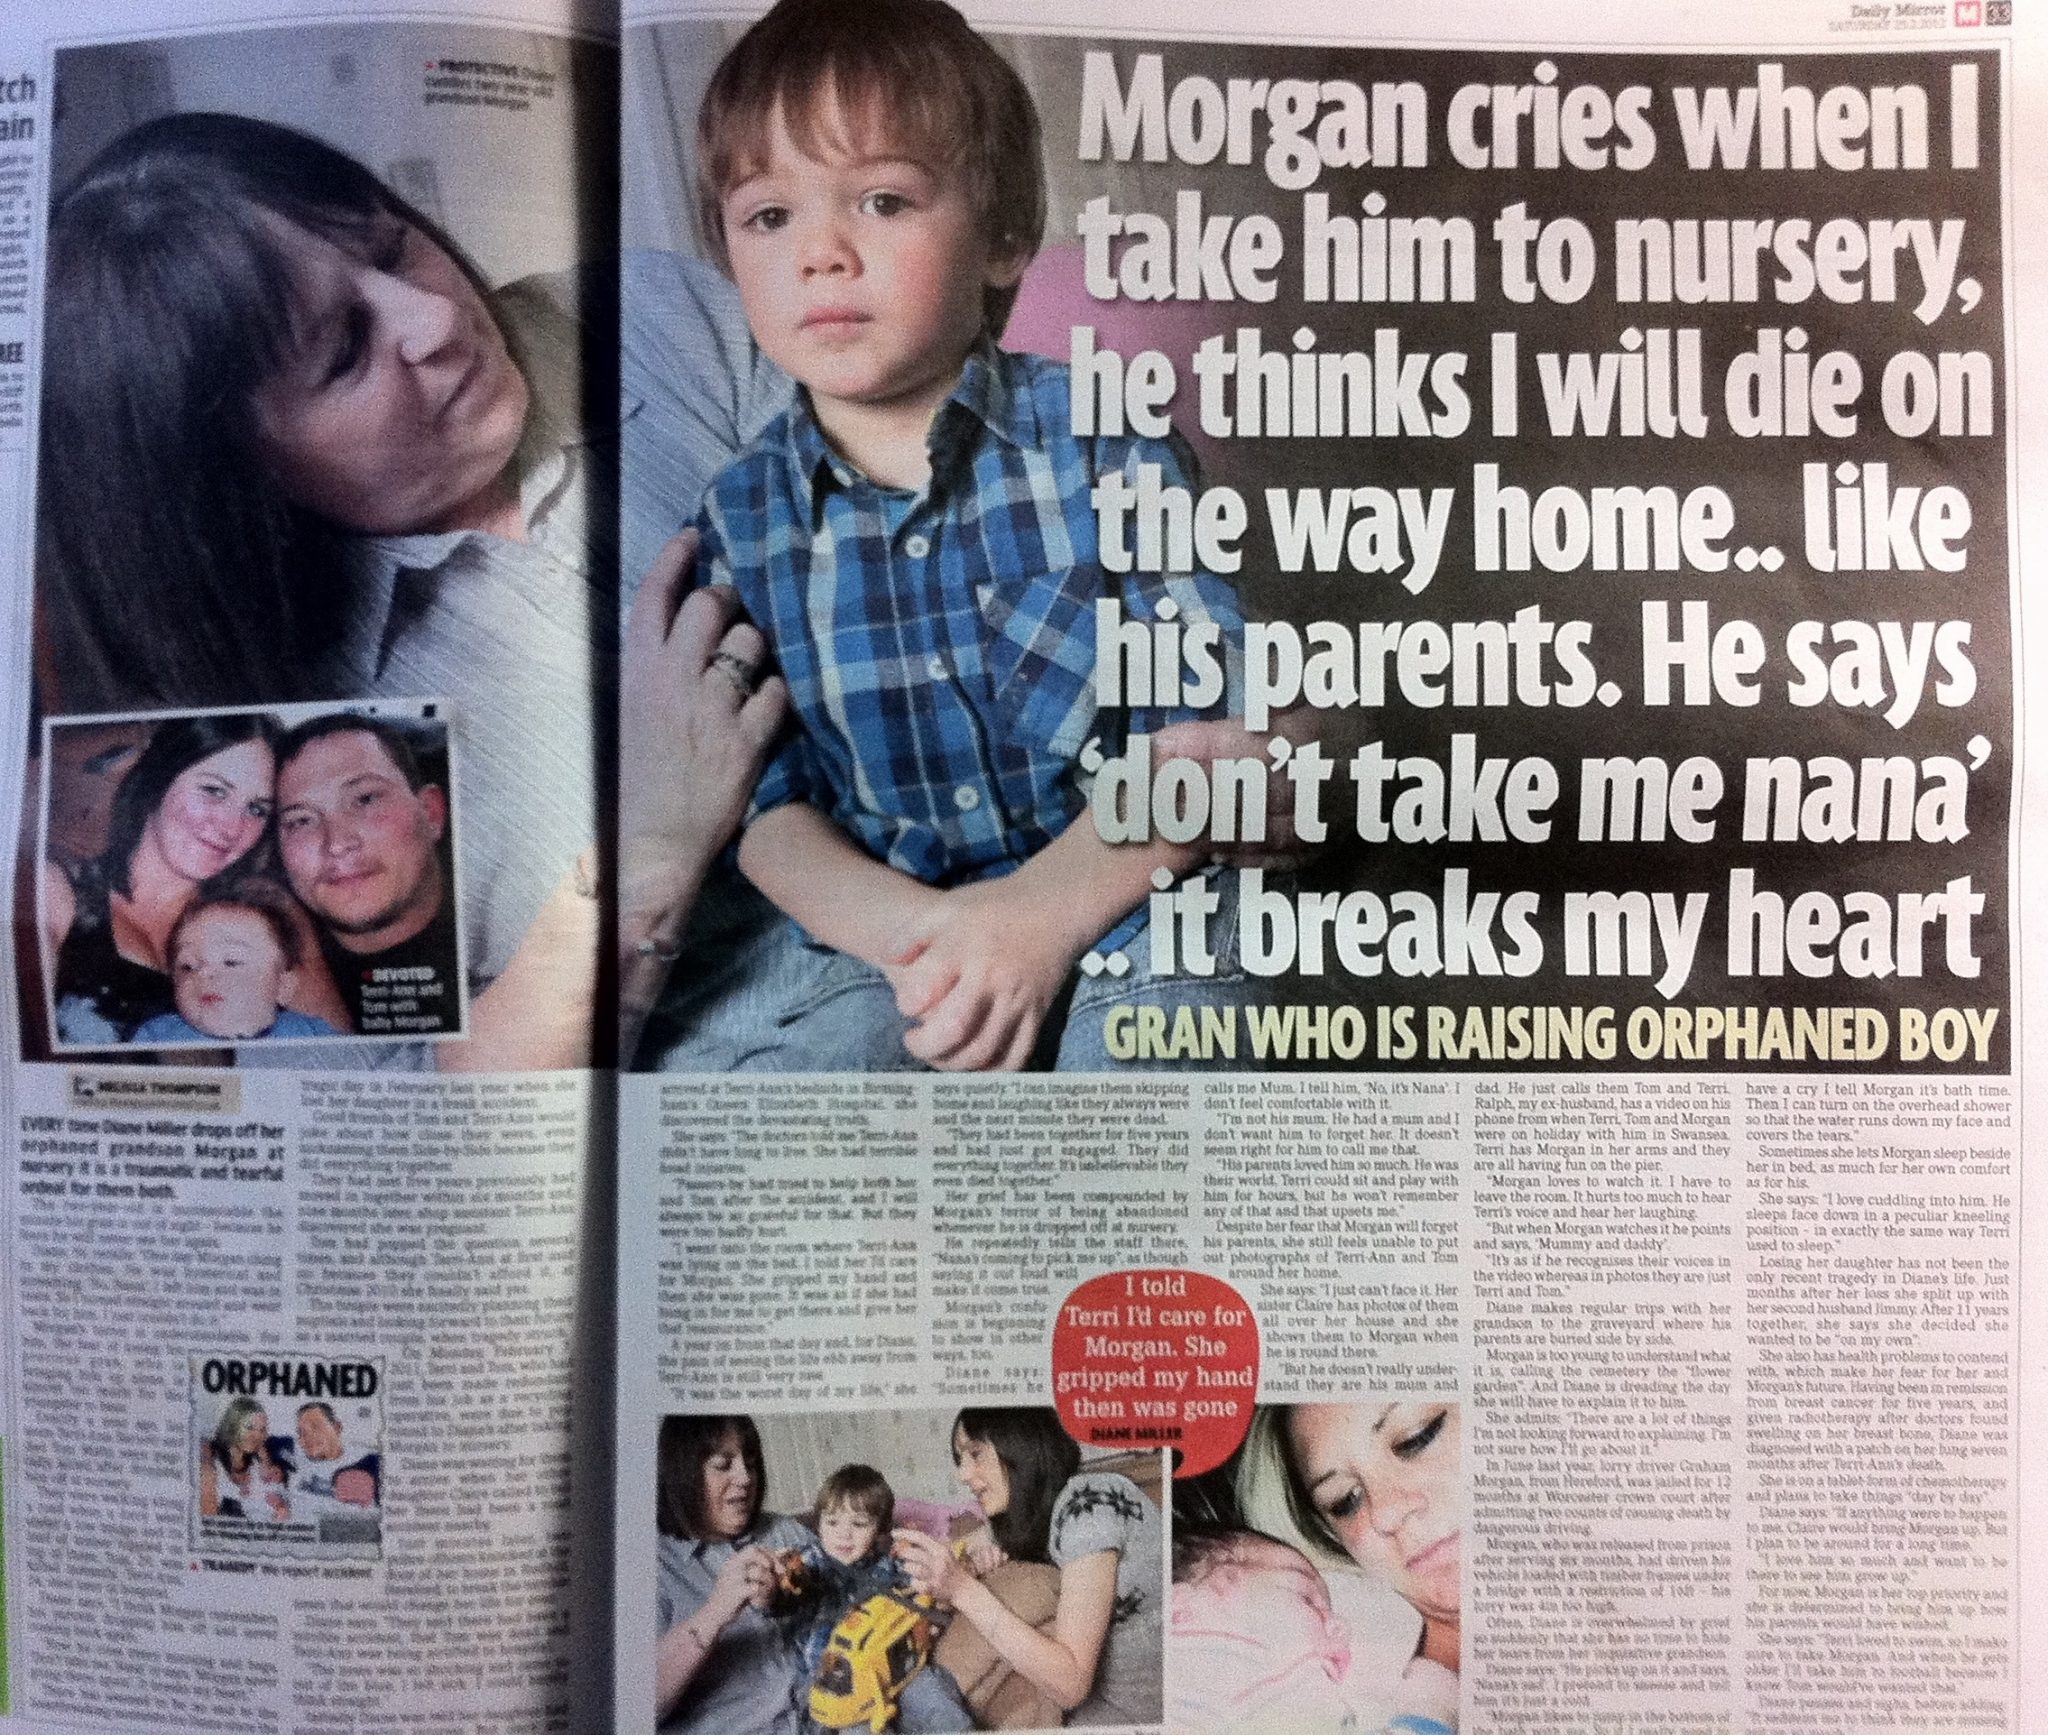 Diane Miller and Morgan's Story Appears in the Daily Mirror